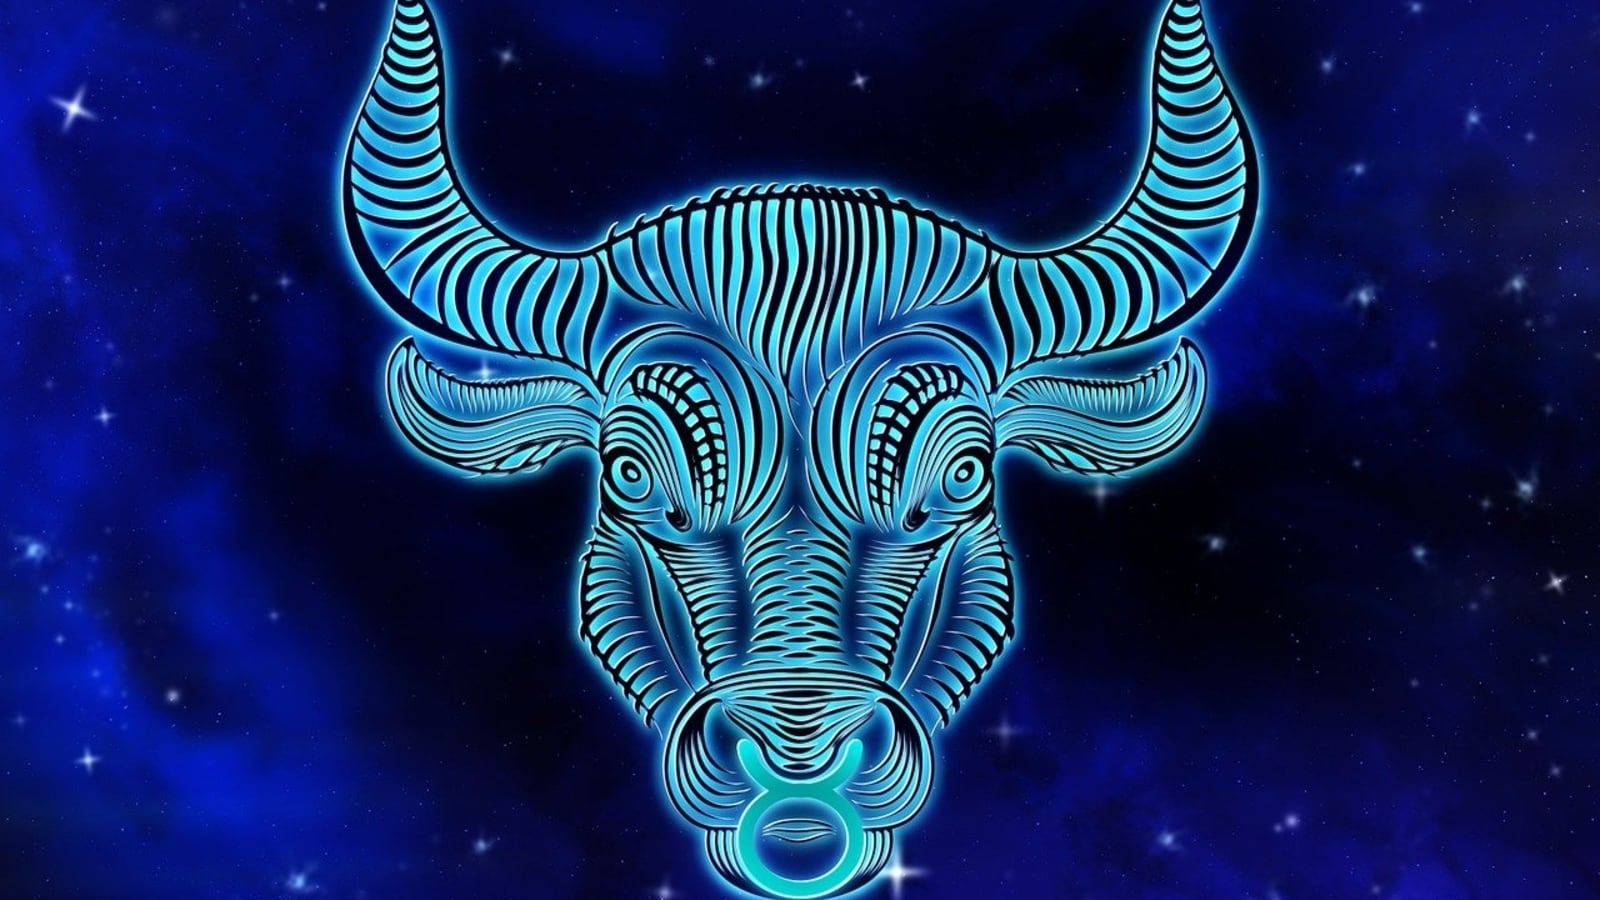 Taurus Daily Horoscope Today, August 21, 2023 predicts high emotions